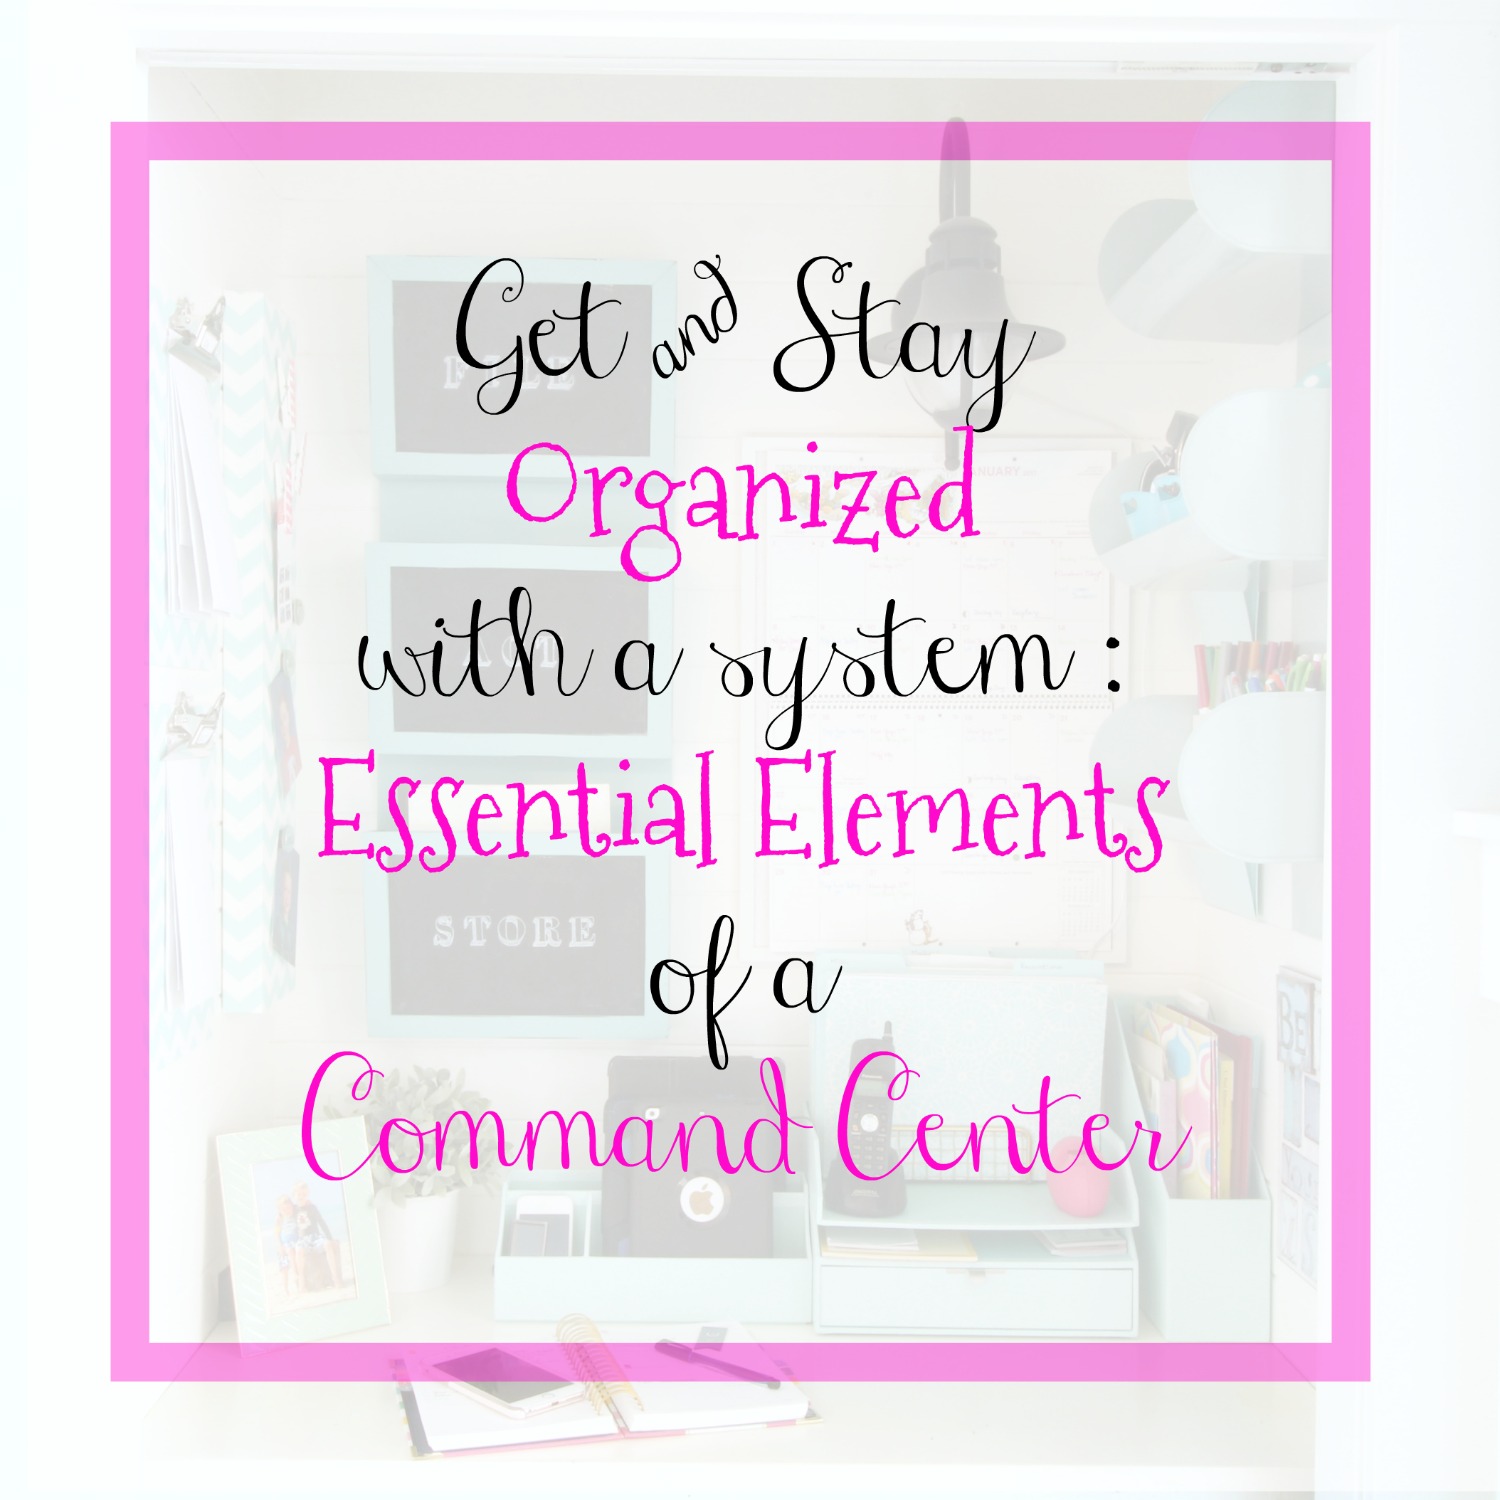 Get & Stay Organized with a System: Essential Elements of a Command Center